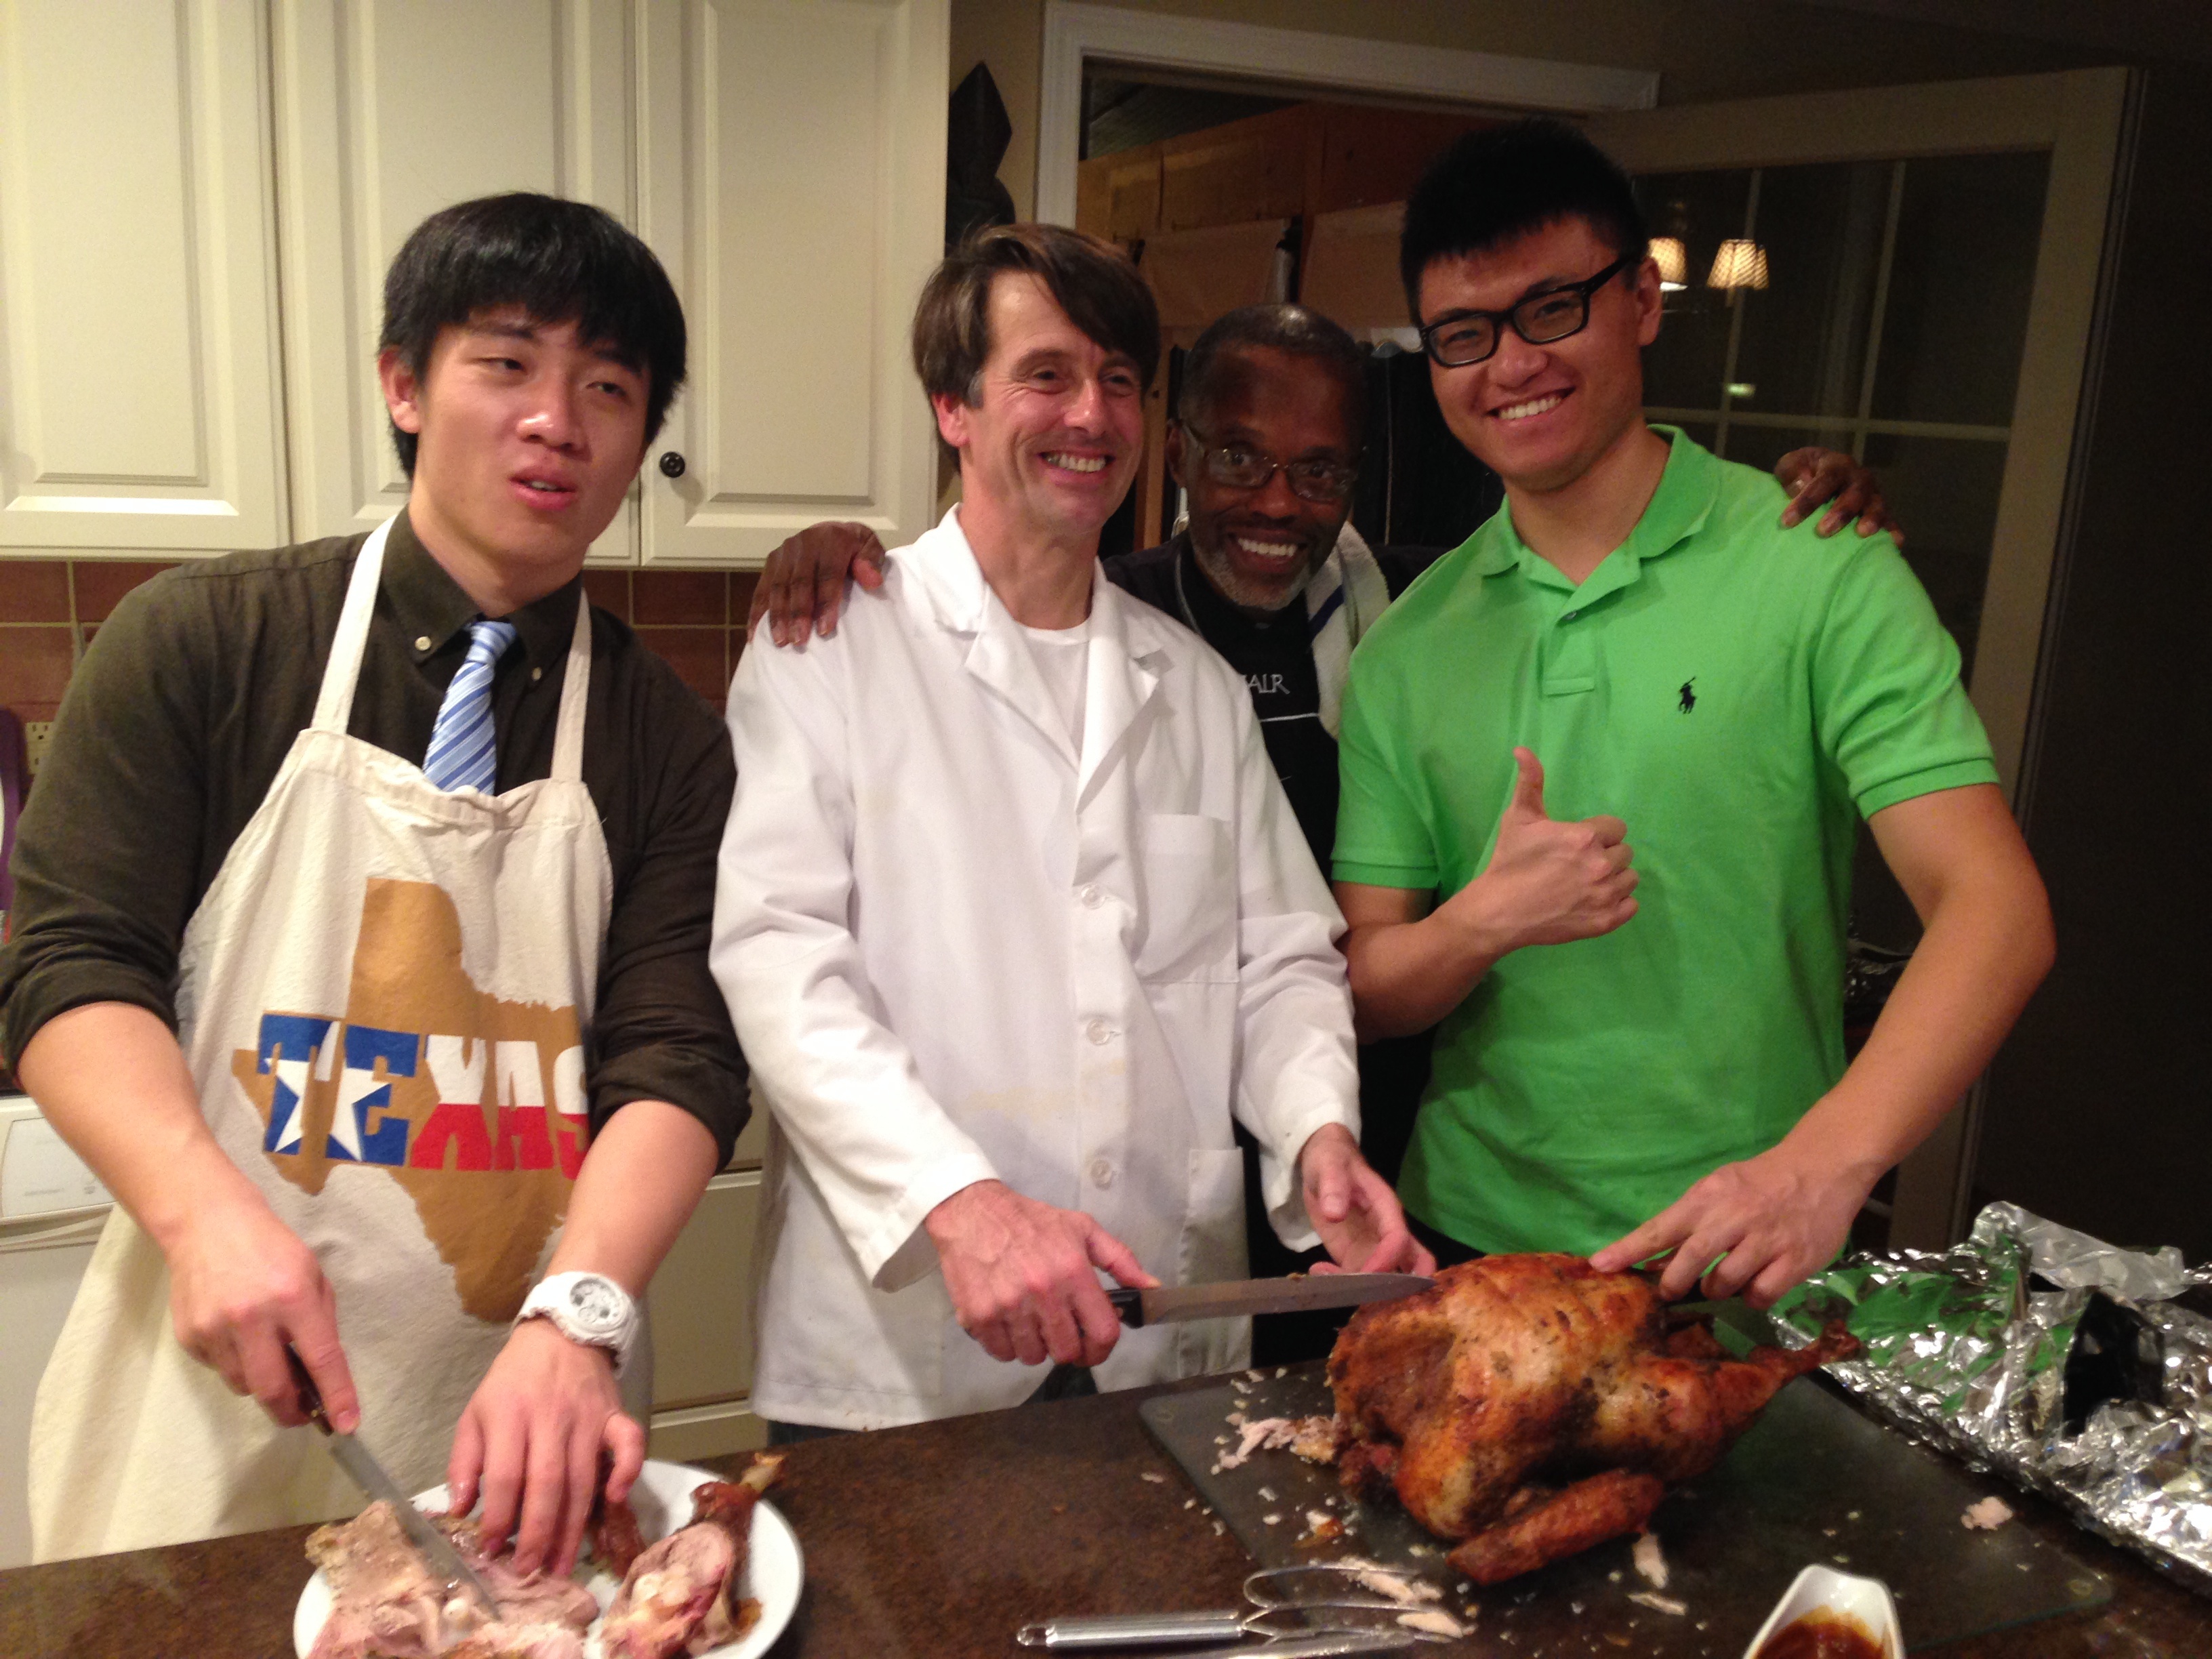 How International Students Can Make the Most of Thanksgiving in